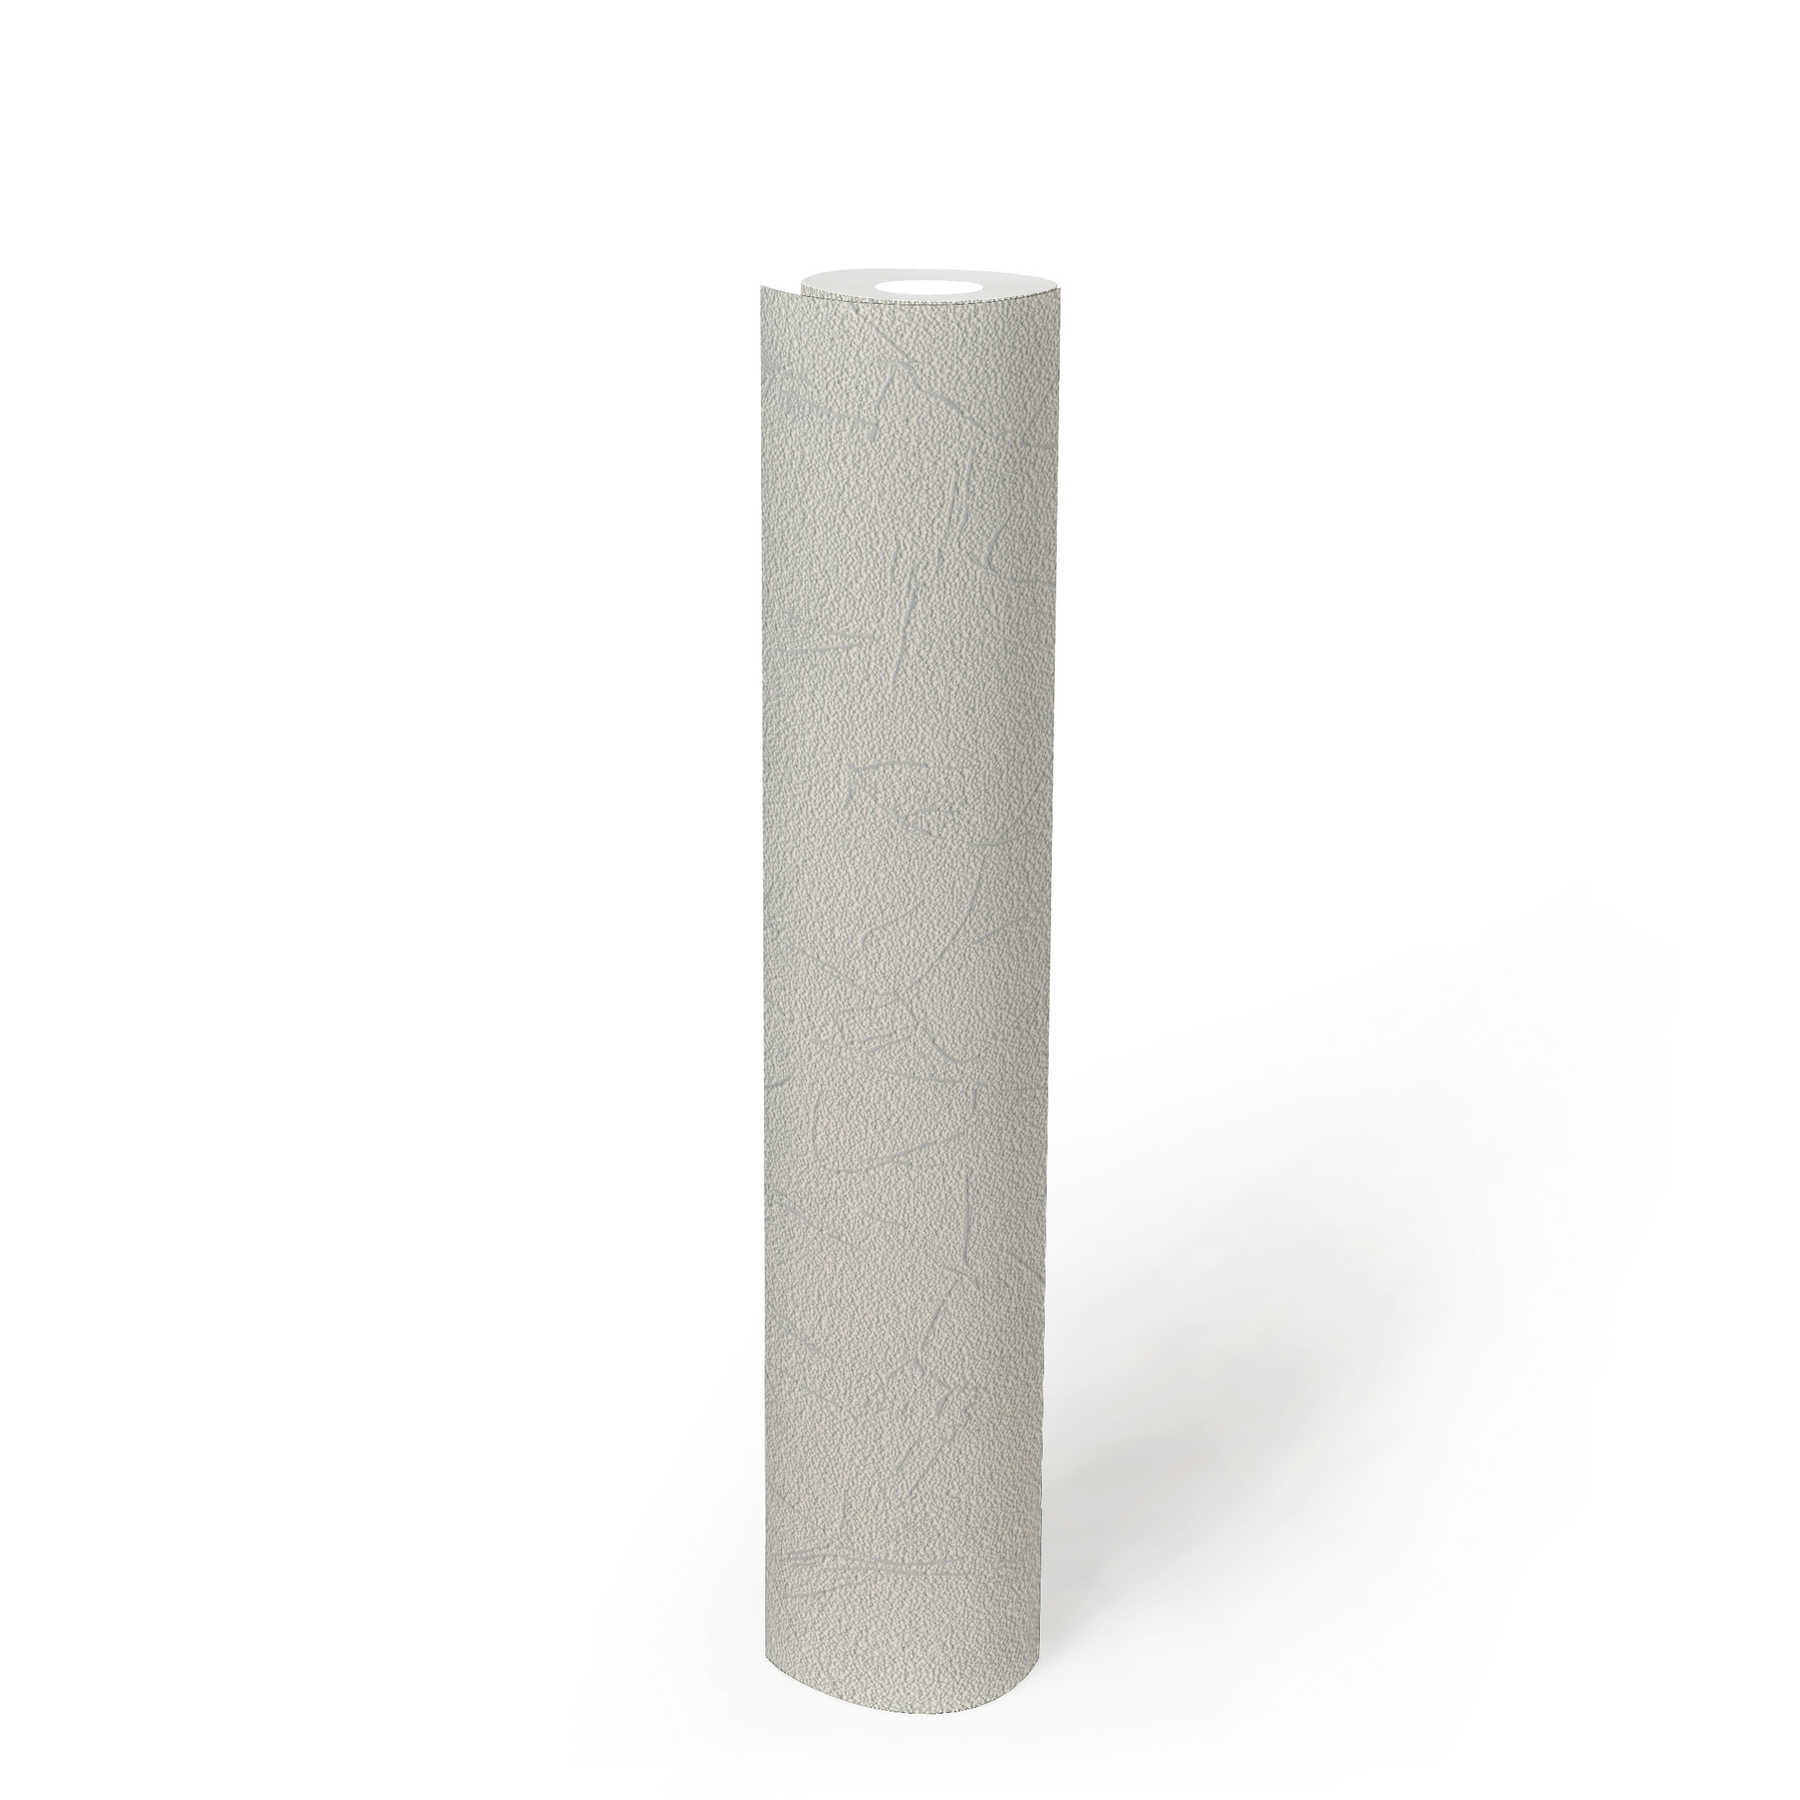             Plaster look wallpaper with hatch pattern - paintable
        